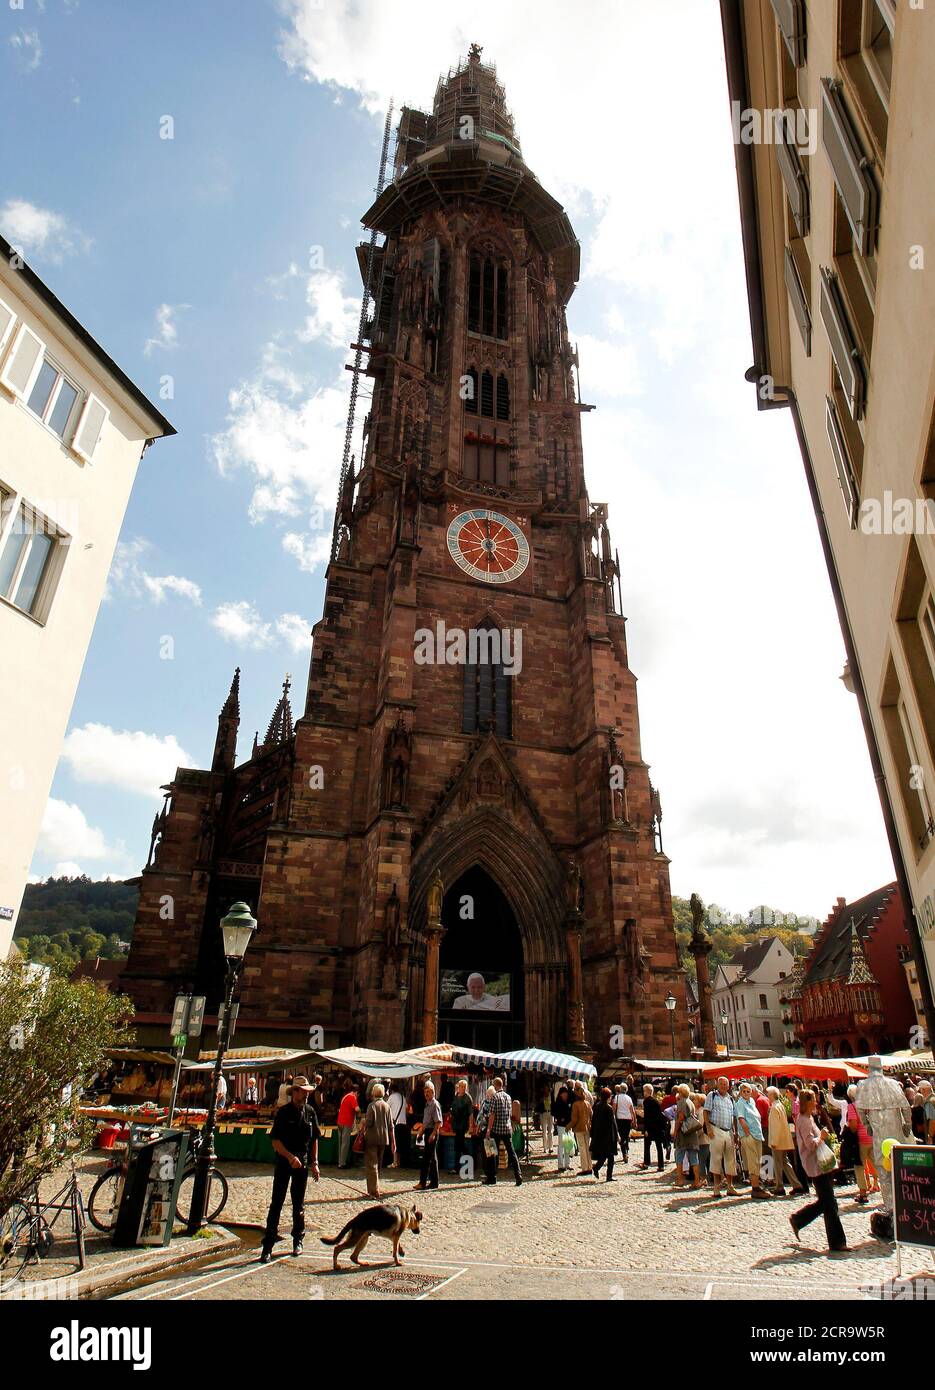 General view of the Freiburger Muenster (Freiburg Minster) in the south-western German town of Freiburg September 14, 2011. Pope Benedict XVI will visit Freiburg from September 24 to 25. REUTERS/Arnd Wiegmann (GERMANY - Tags: RELIGION CITYSPACE) Stock Photo